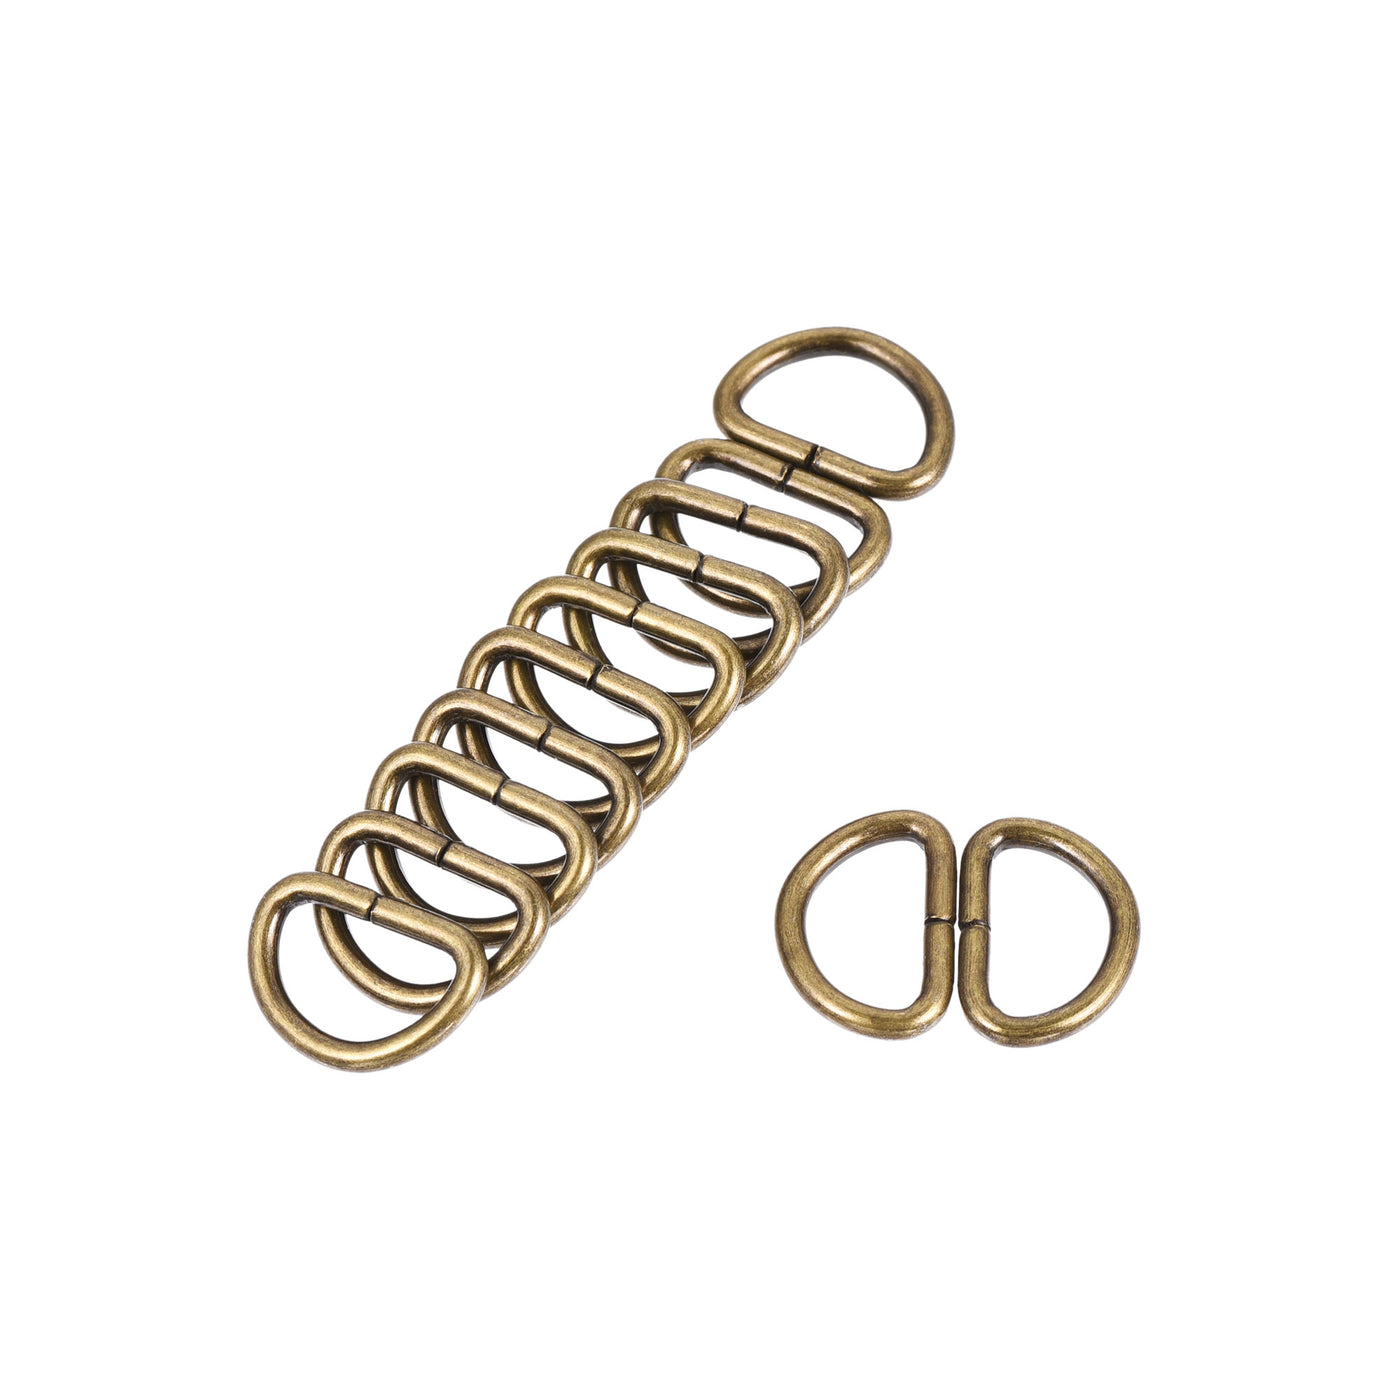 uxcell Uxcell Metal D Ring 0.39"(10mm) D-Rings Buckle for Hardware Bags Belts Craft DIY Accessories Bronze Tone 50pcs